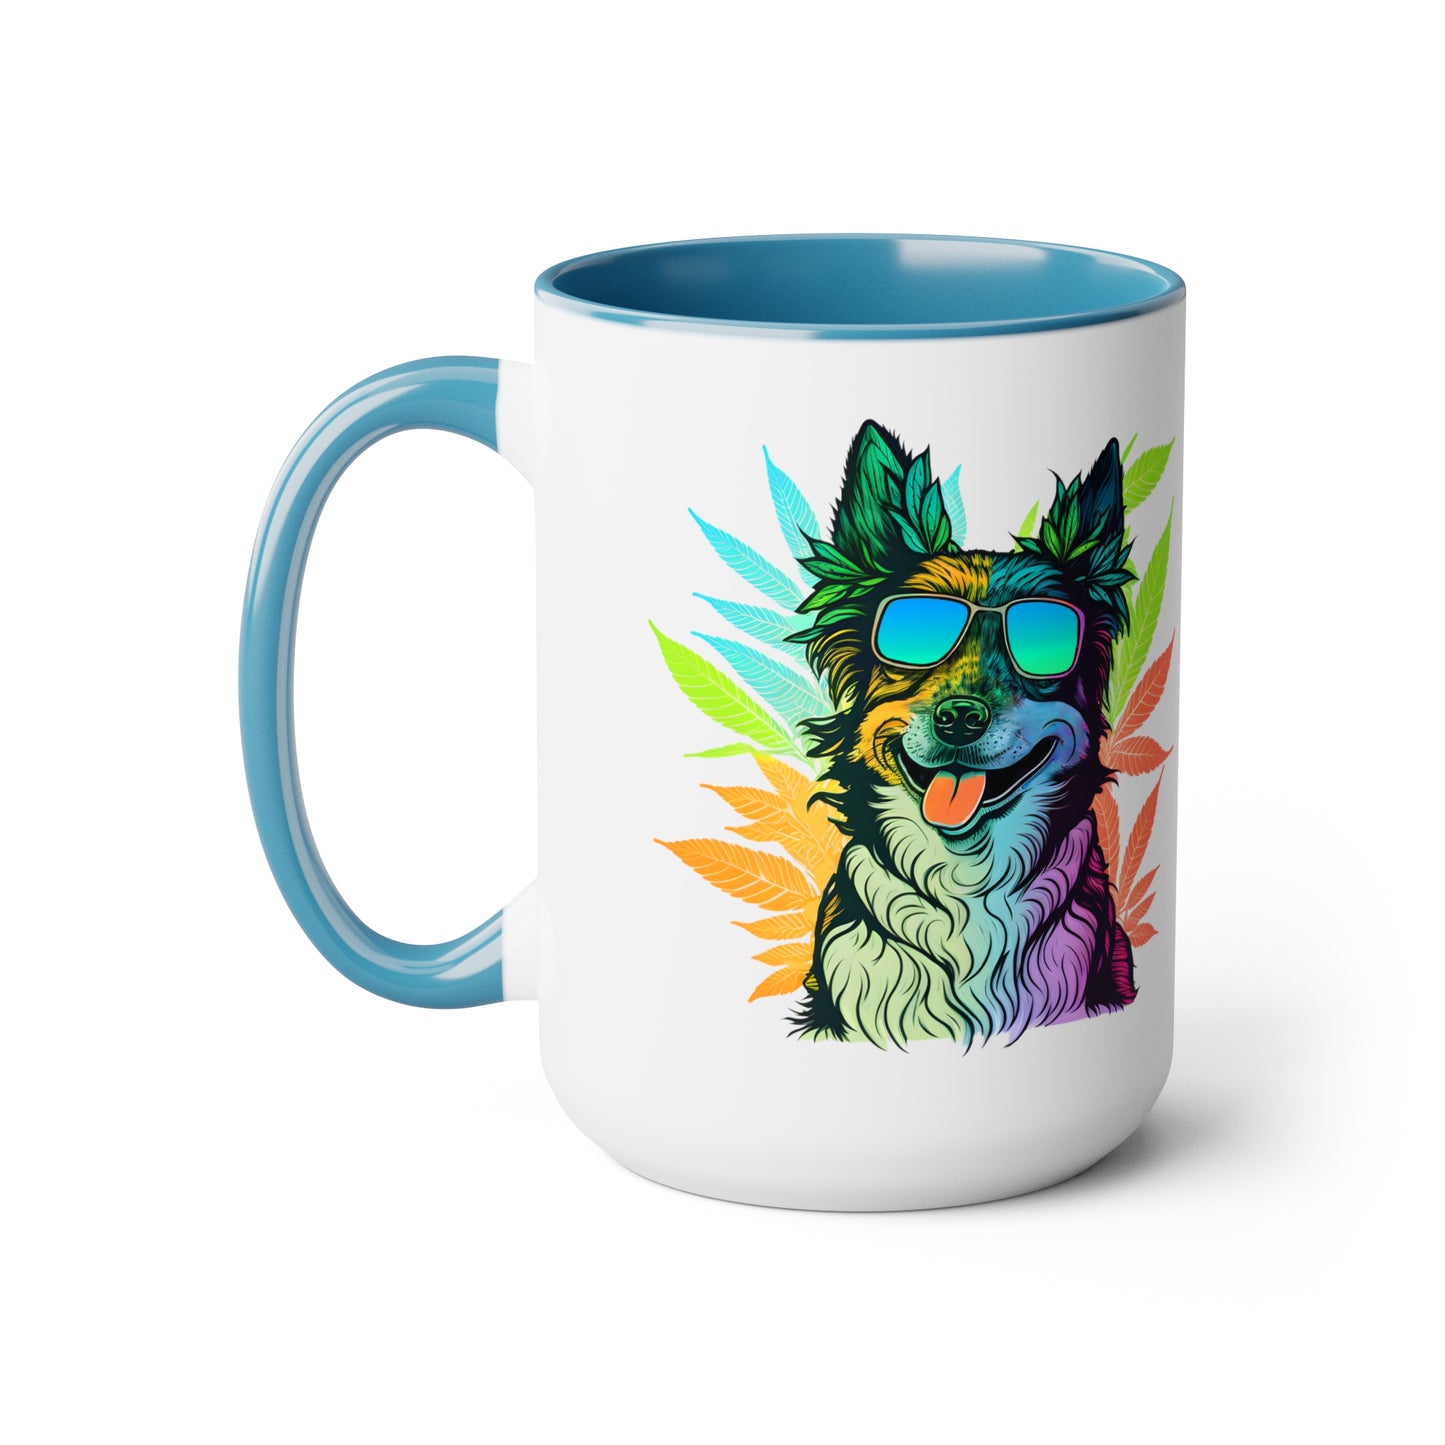 a Cannabis Border Collie mug with an image of a dog wearing sunglasses.